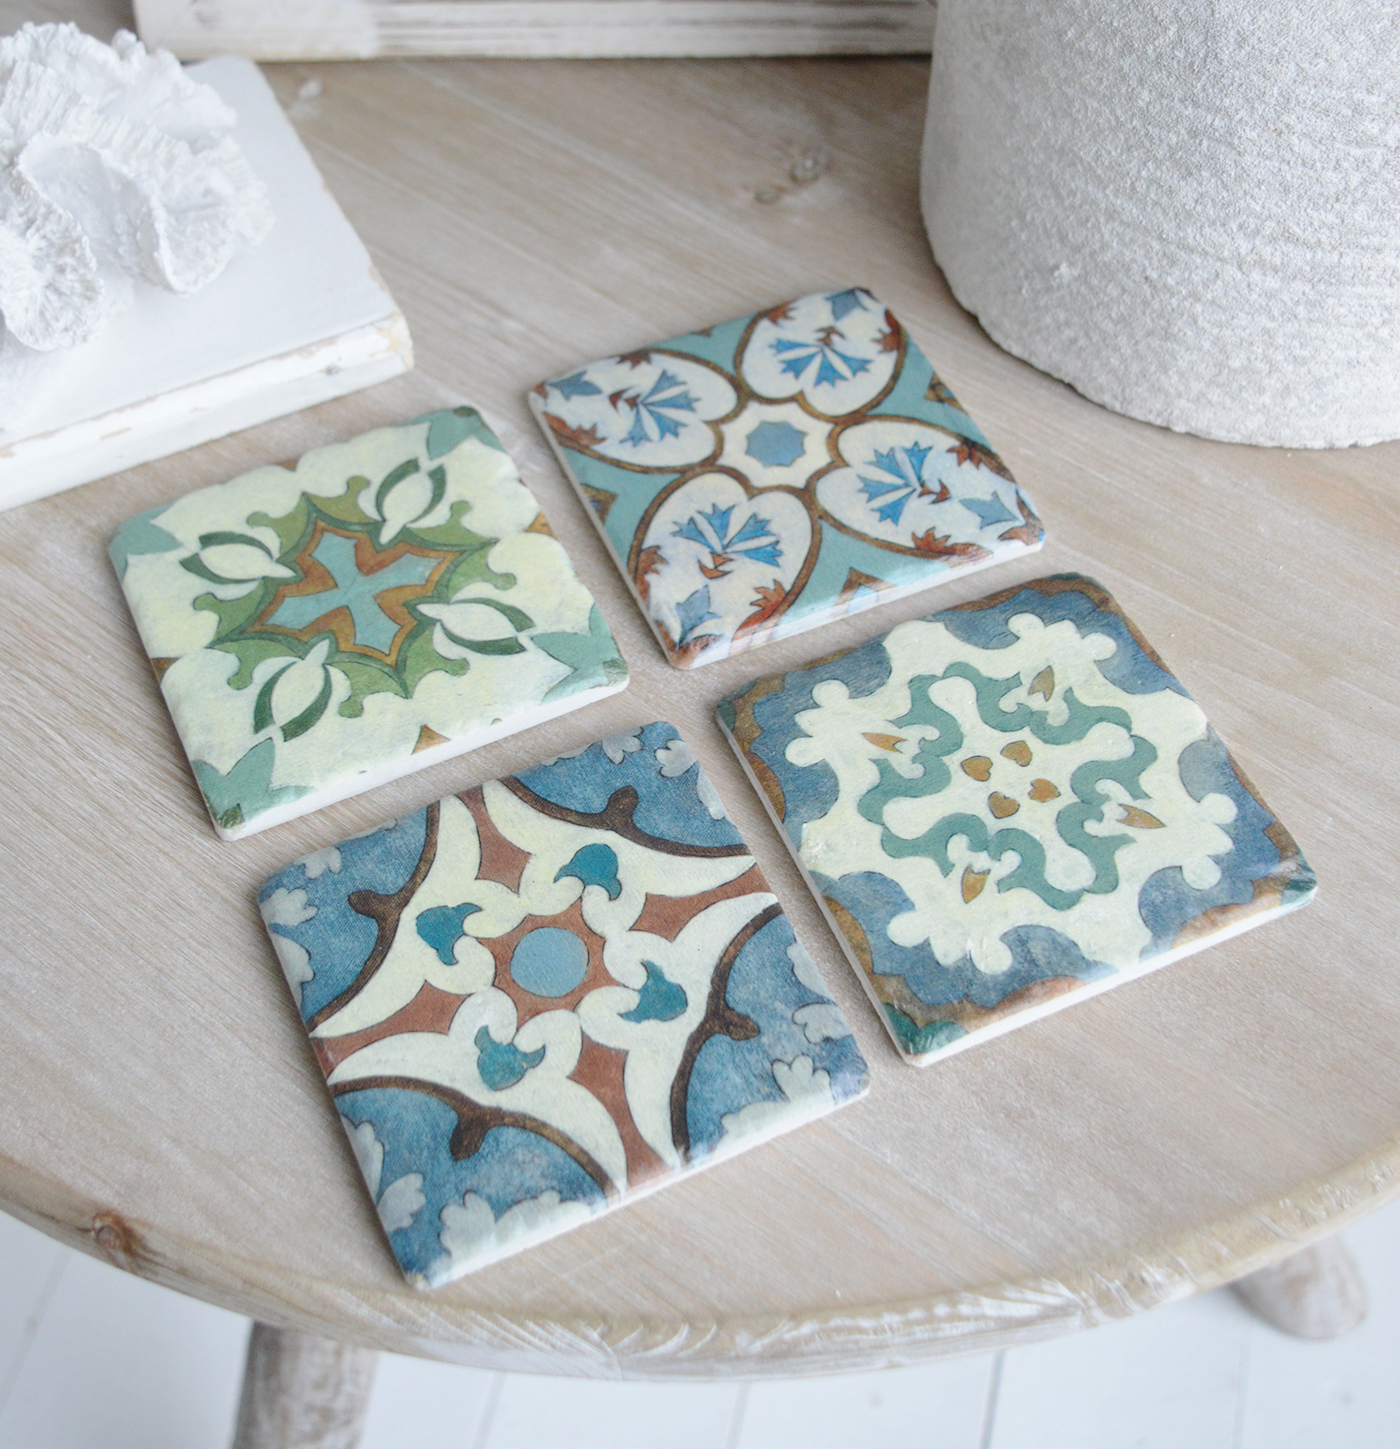 Period mosaic coaster tiles - Coasters to complement New England modern farmhouse, country and coastal furniture, home decor and interiors